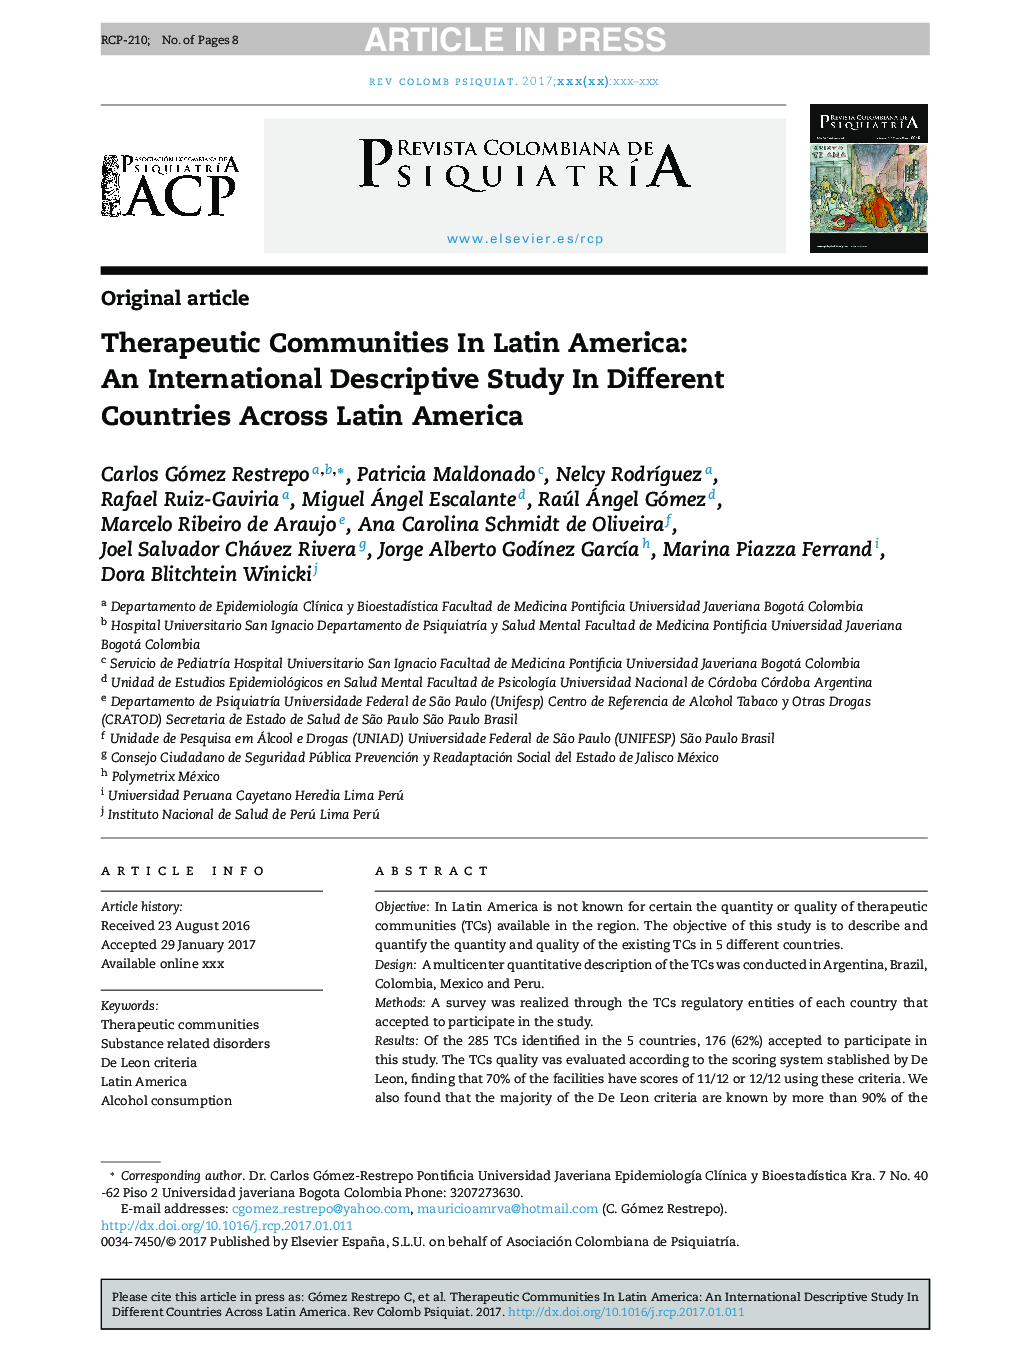 Therapeutic Communities In Latin America: An International Descriptive Study In Different Countries Across Latin America